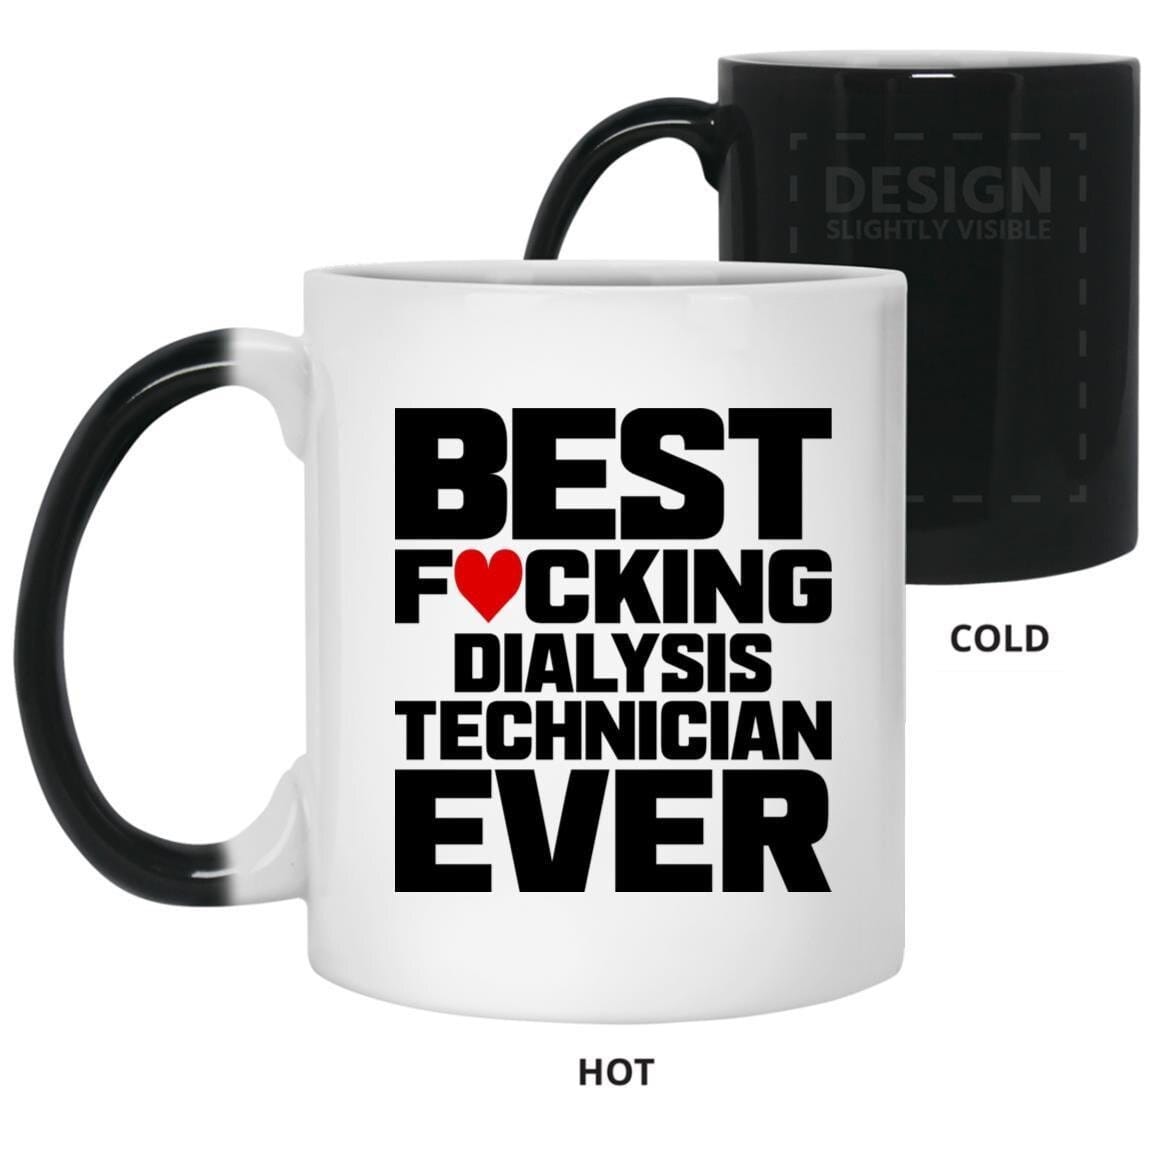 Best Fucking Dialysis Technician Ever (Coffee Mugs) Funny Gift for Nephrology Kidney Techs 11 oz. Color Changing Mug / White